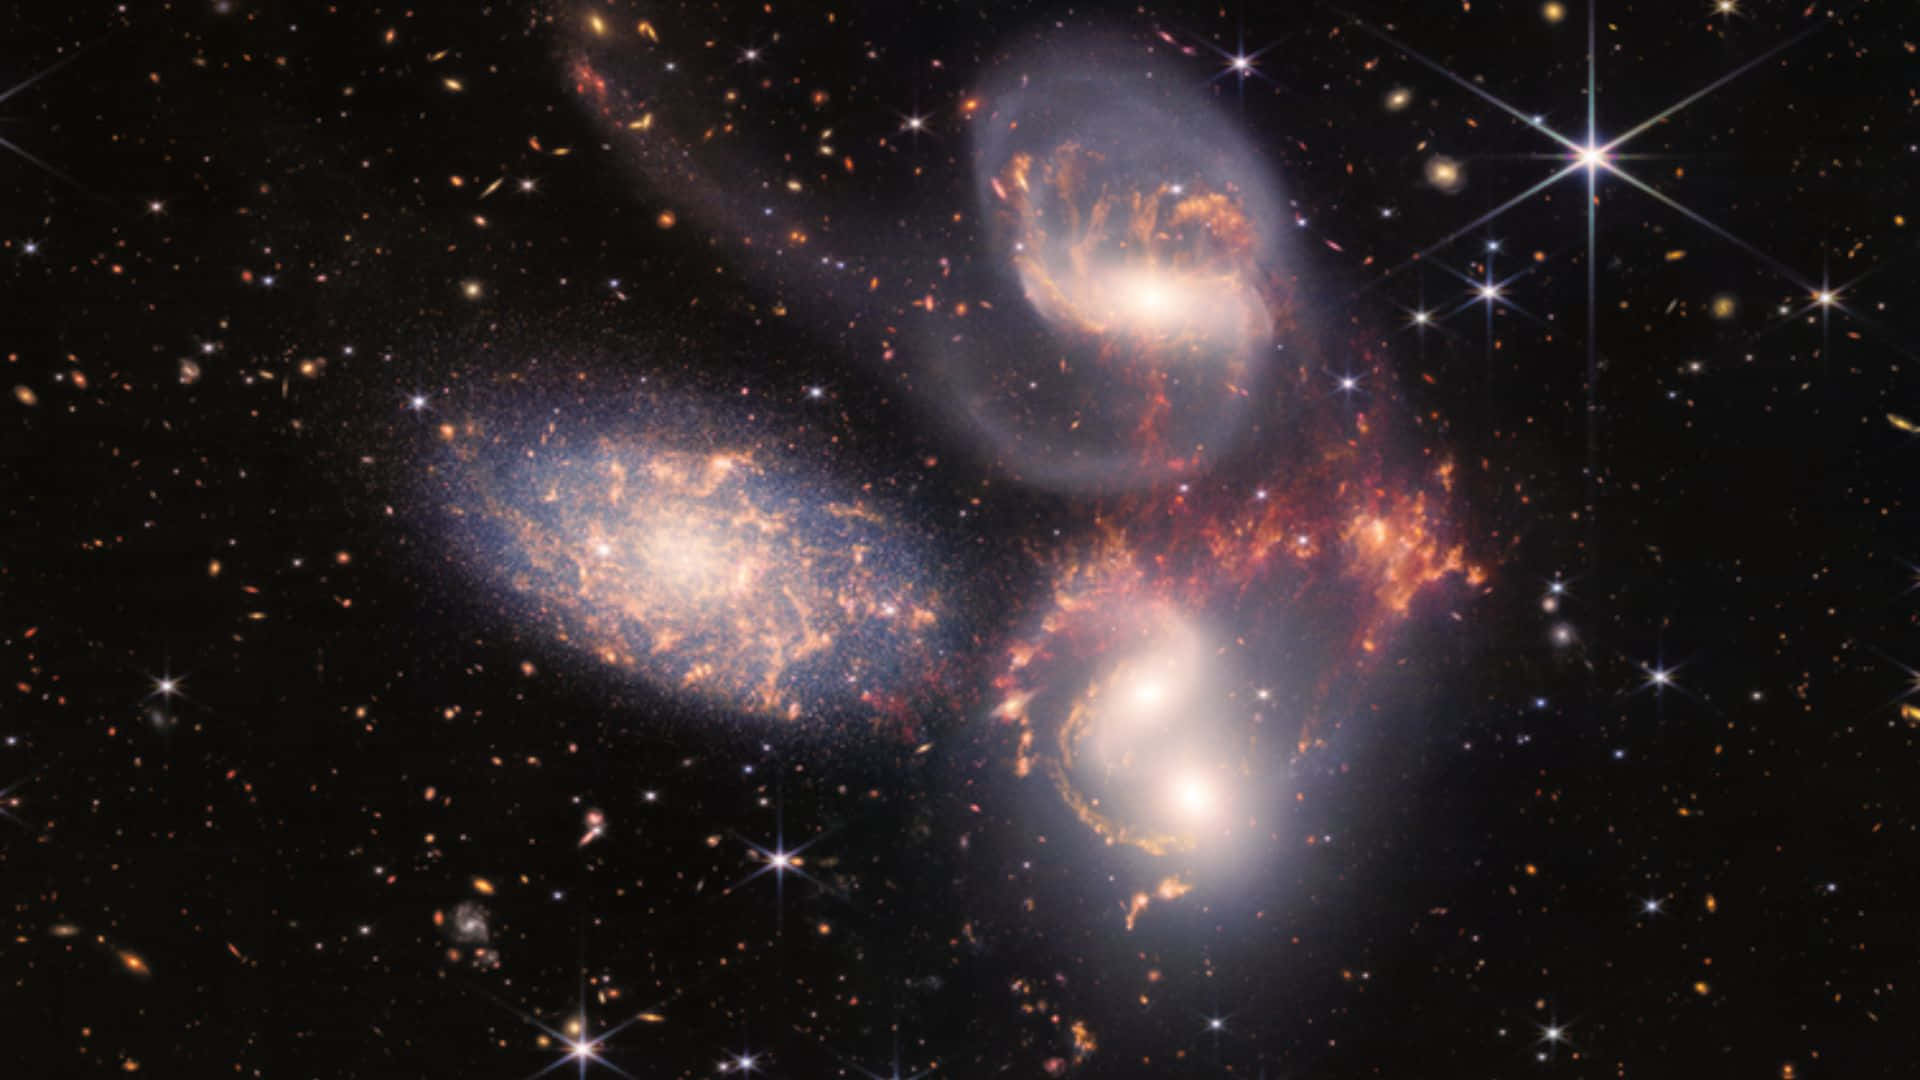 Stephan's Quintet Galaxy Group Astronomy Wallpaper